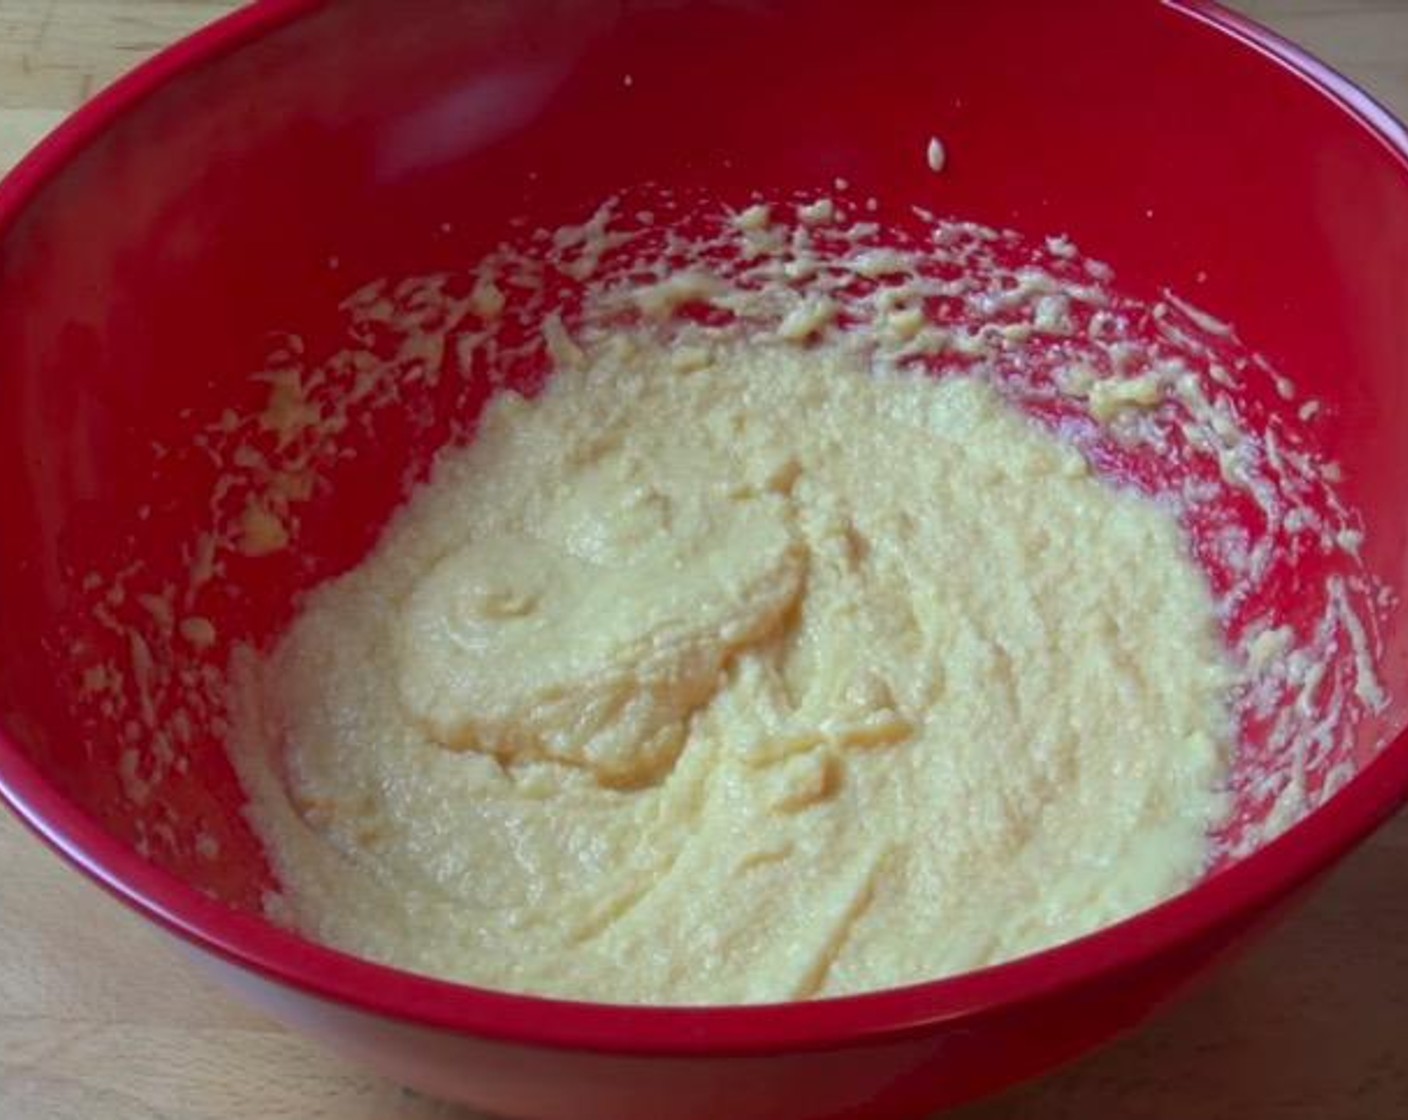 step 3 Stir in half of the Milk (2/3 cup) and half of the Self-Rising Flour (2 cups). Combine and then add the remaining milk and flour.